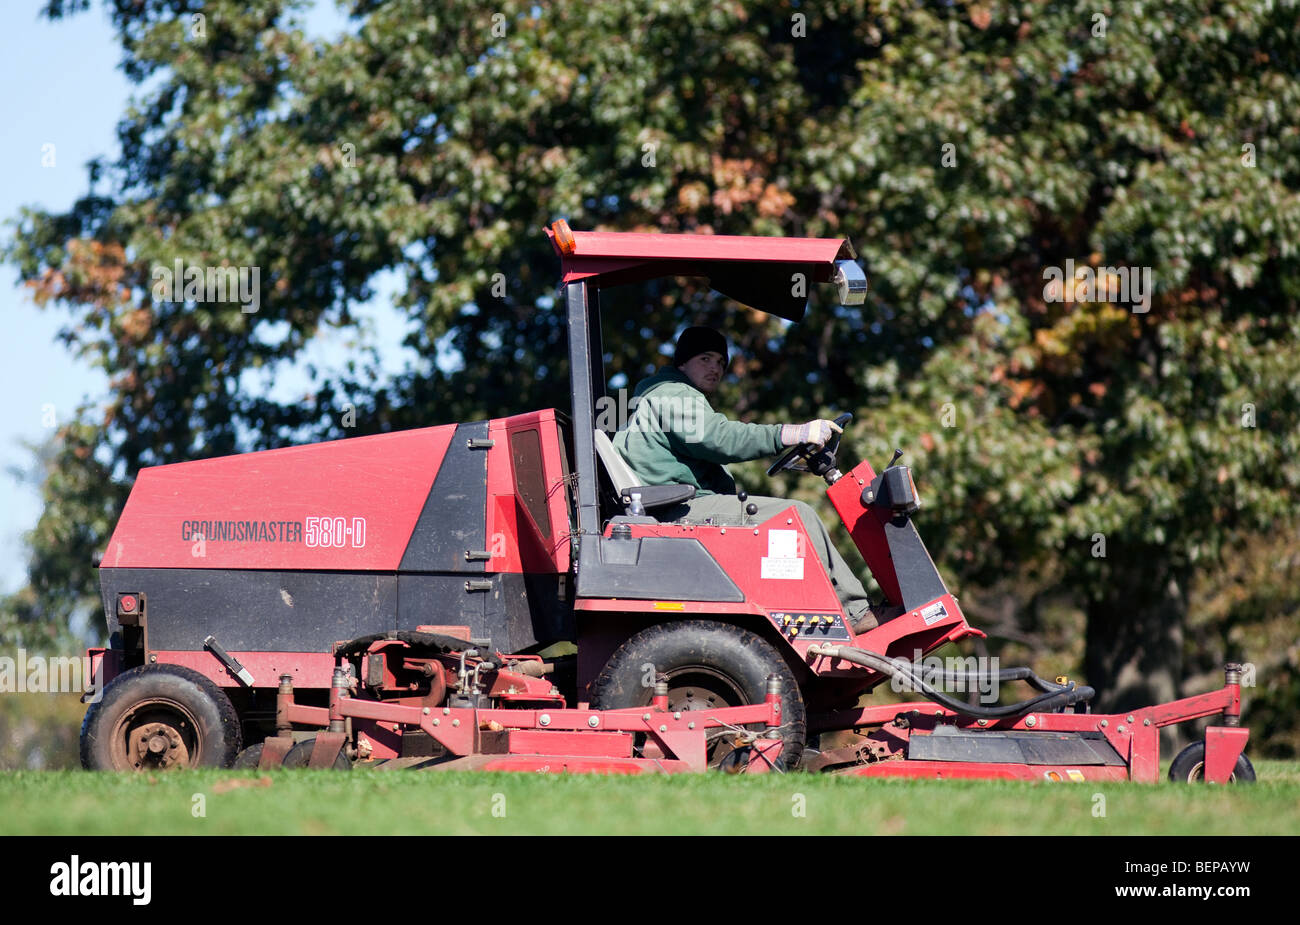 A grounds keeper mowing with a large toro mower. Stock Photo